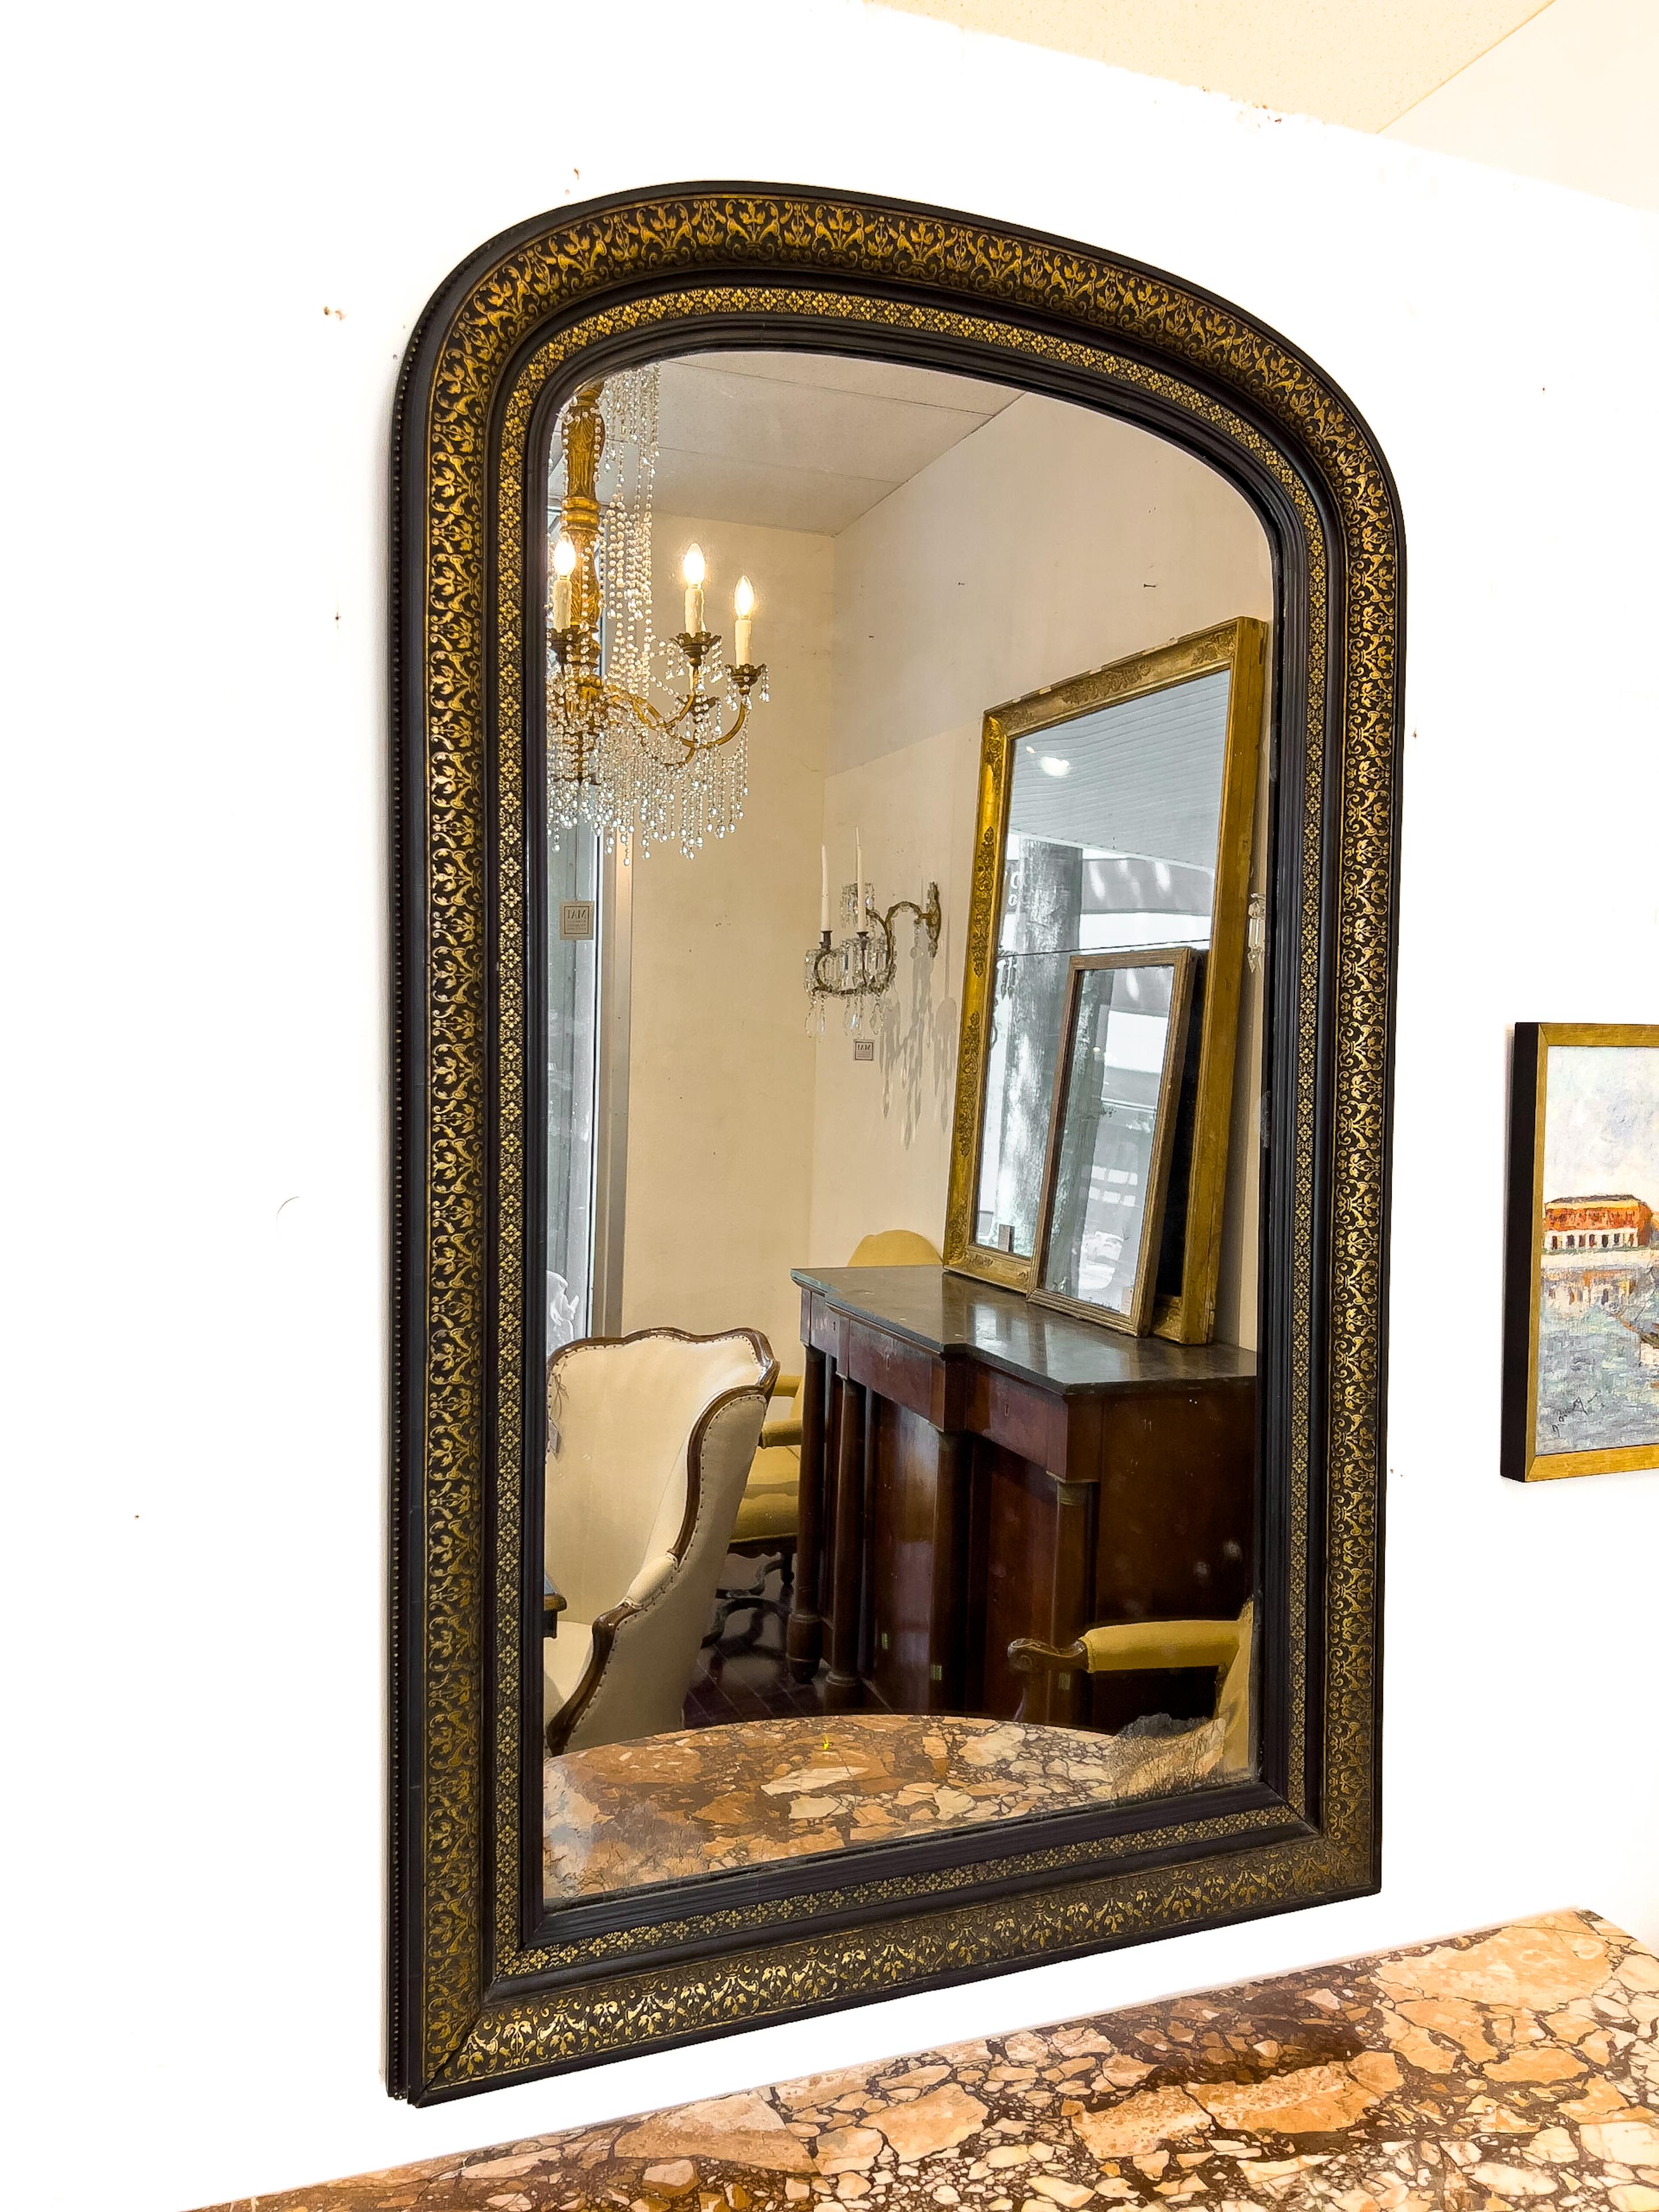 19th Century Napoleon III mirror with black and gilt decoration. It has the original mirror which has dark inclusions and foggy appearance.